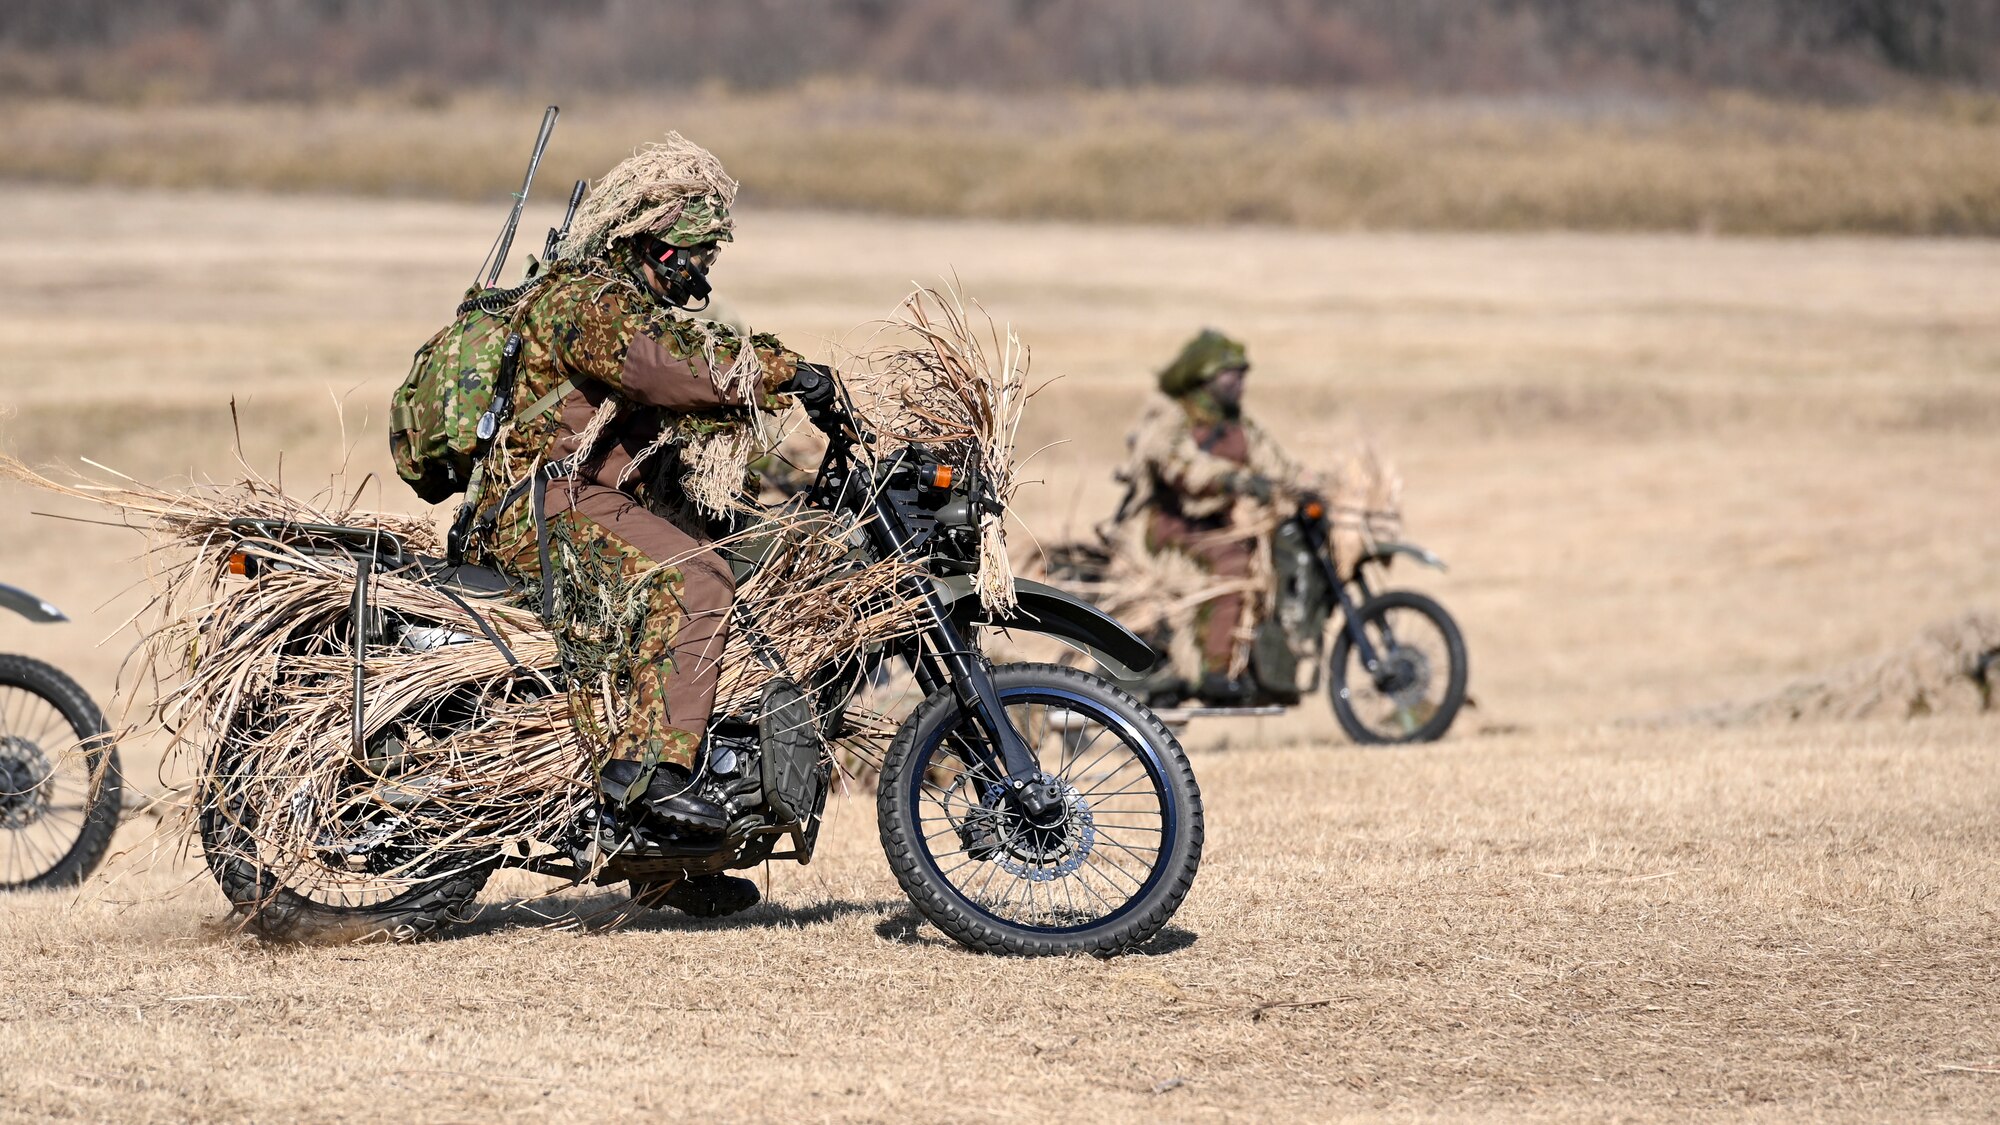 a couple grass camouflaged Japanese soldiers ride motorcycles through a field